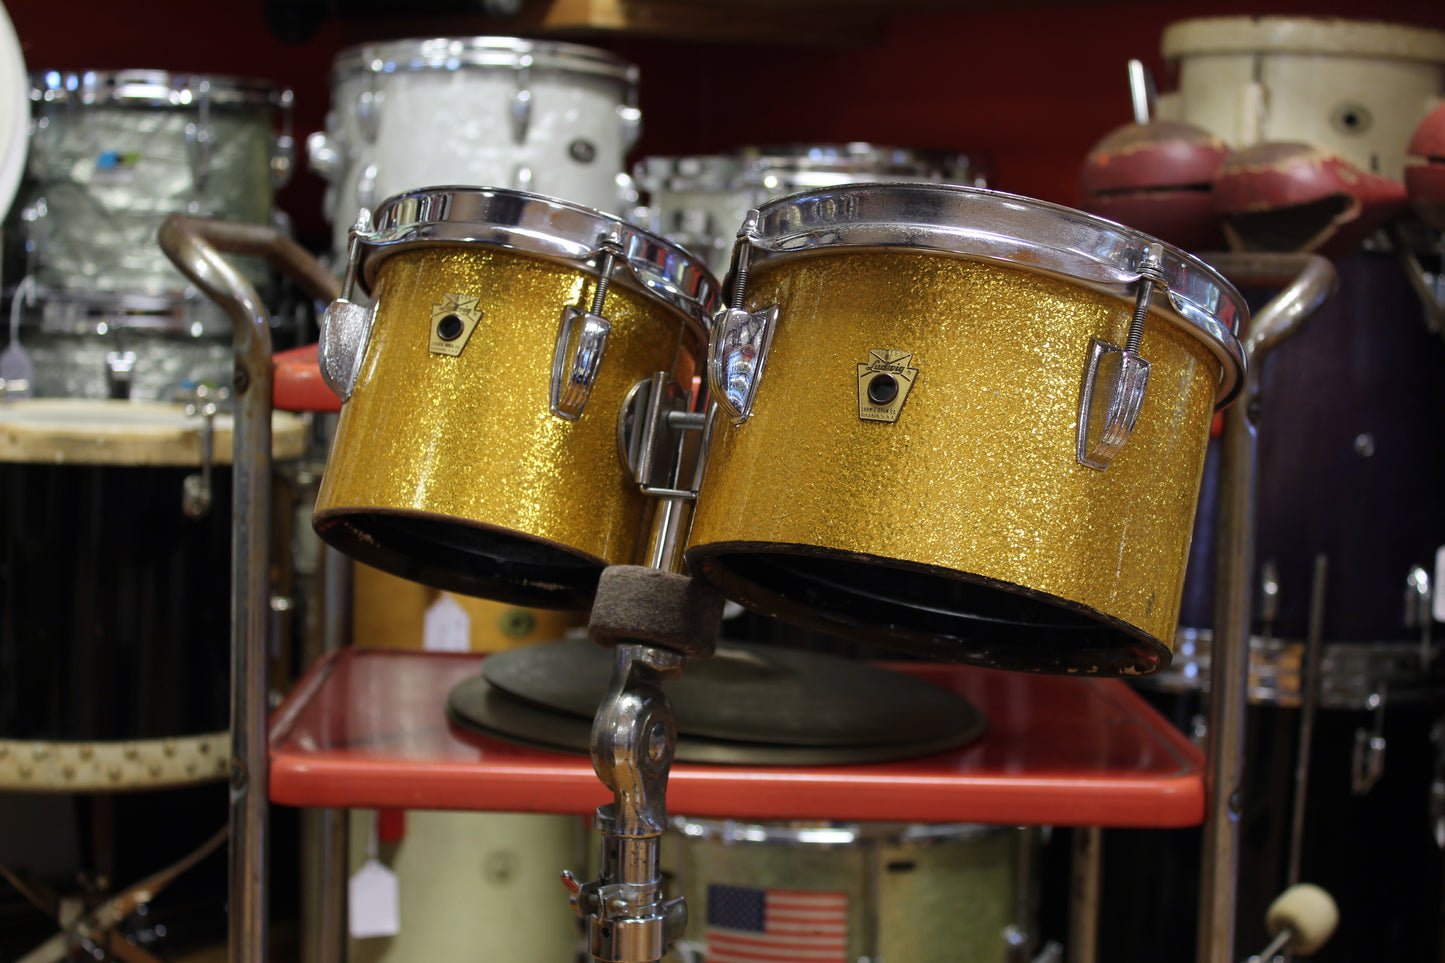 1967 Ludwig 6" & 8" Bongo Drums in Gold Sparkle